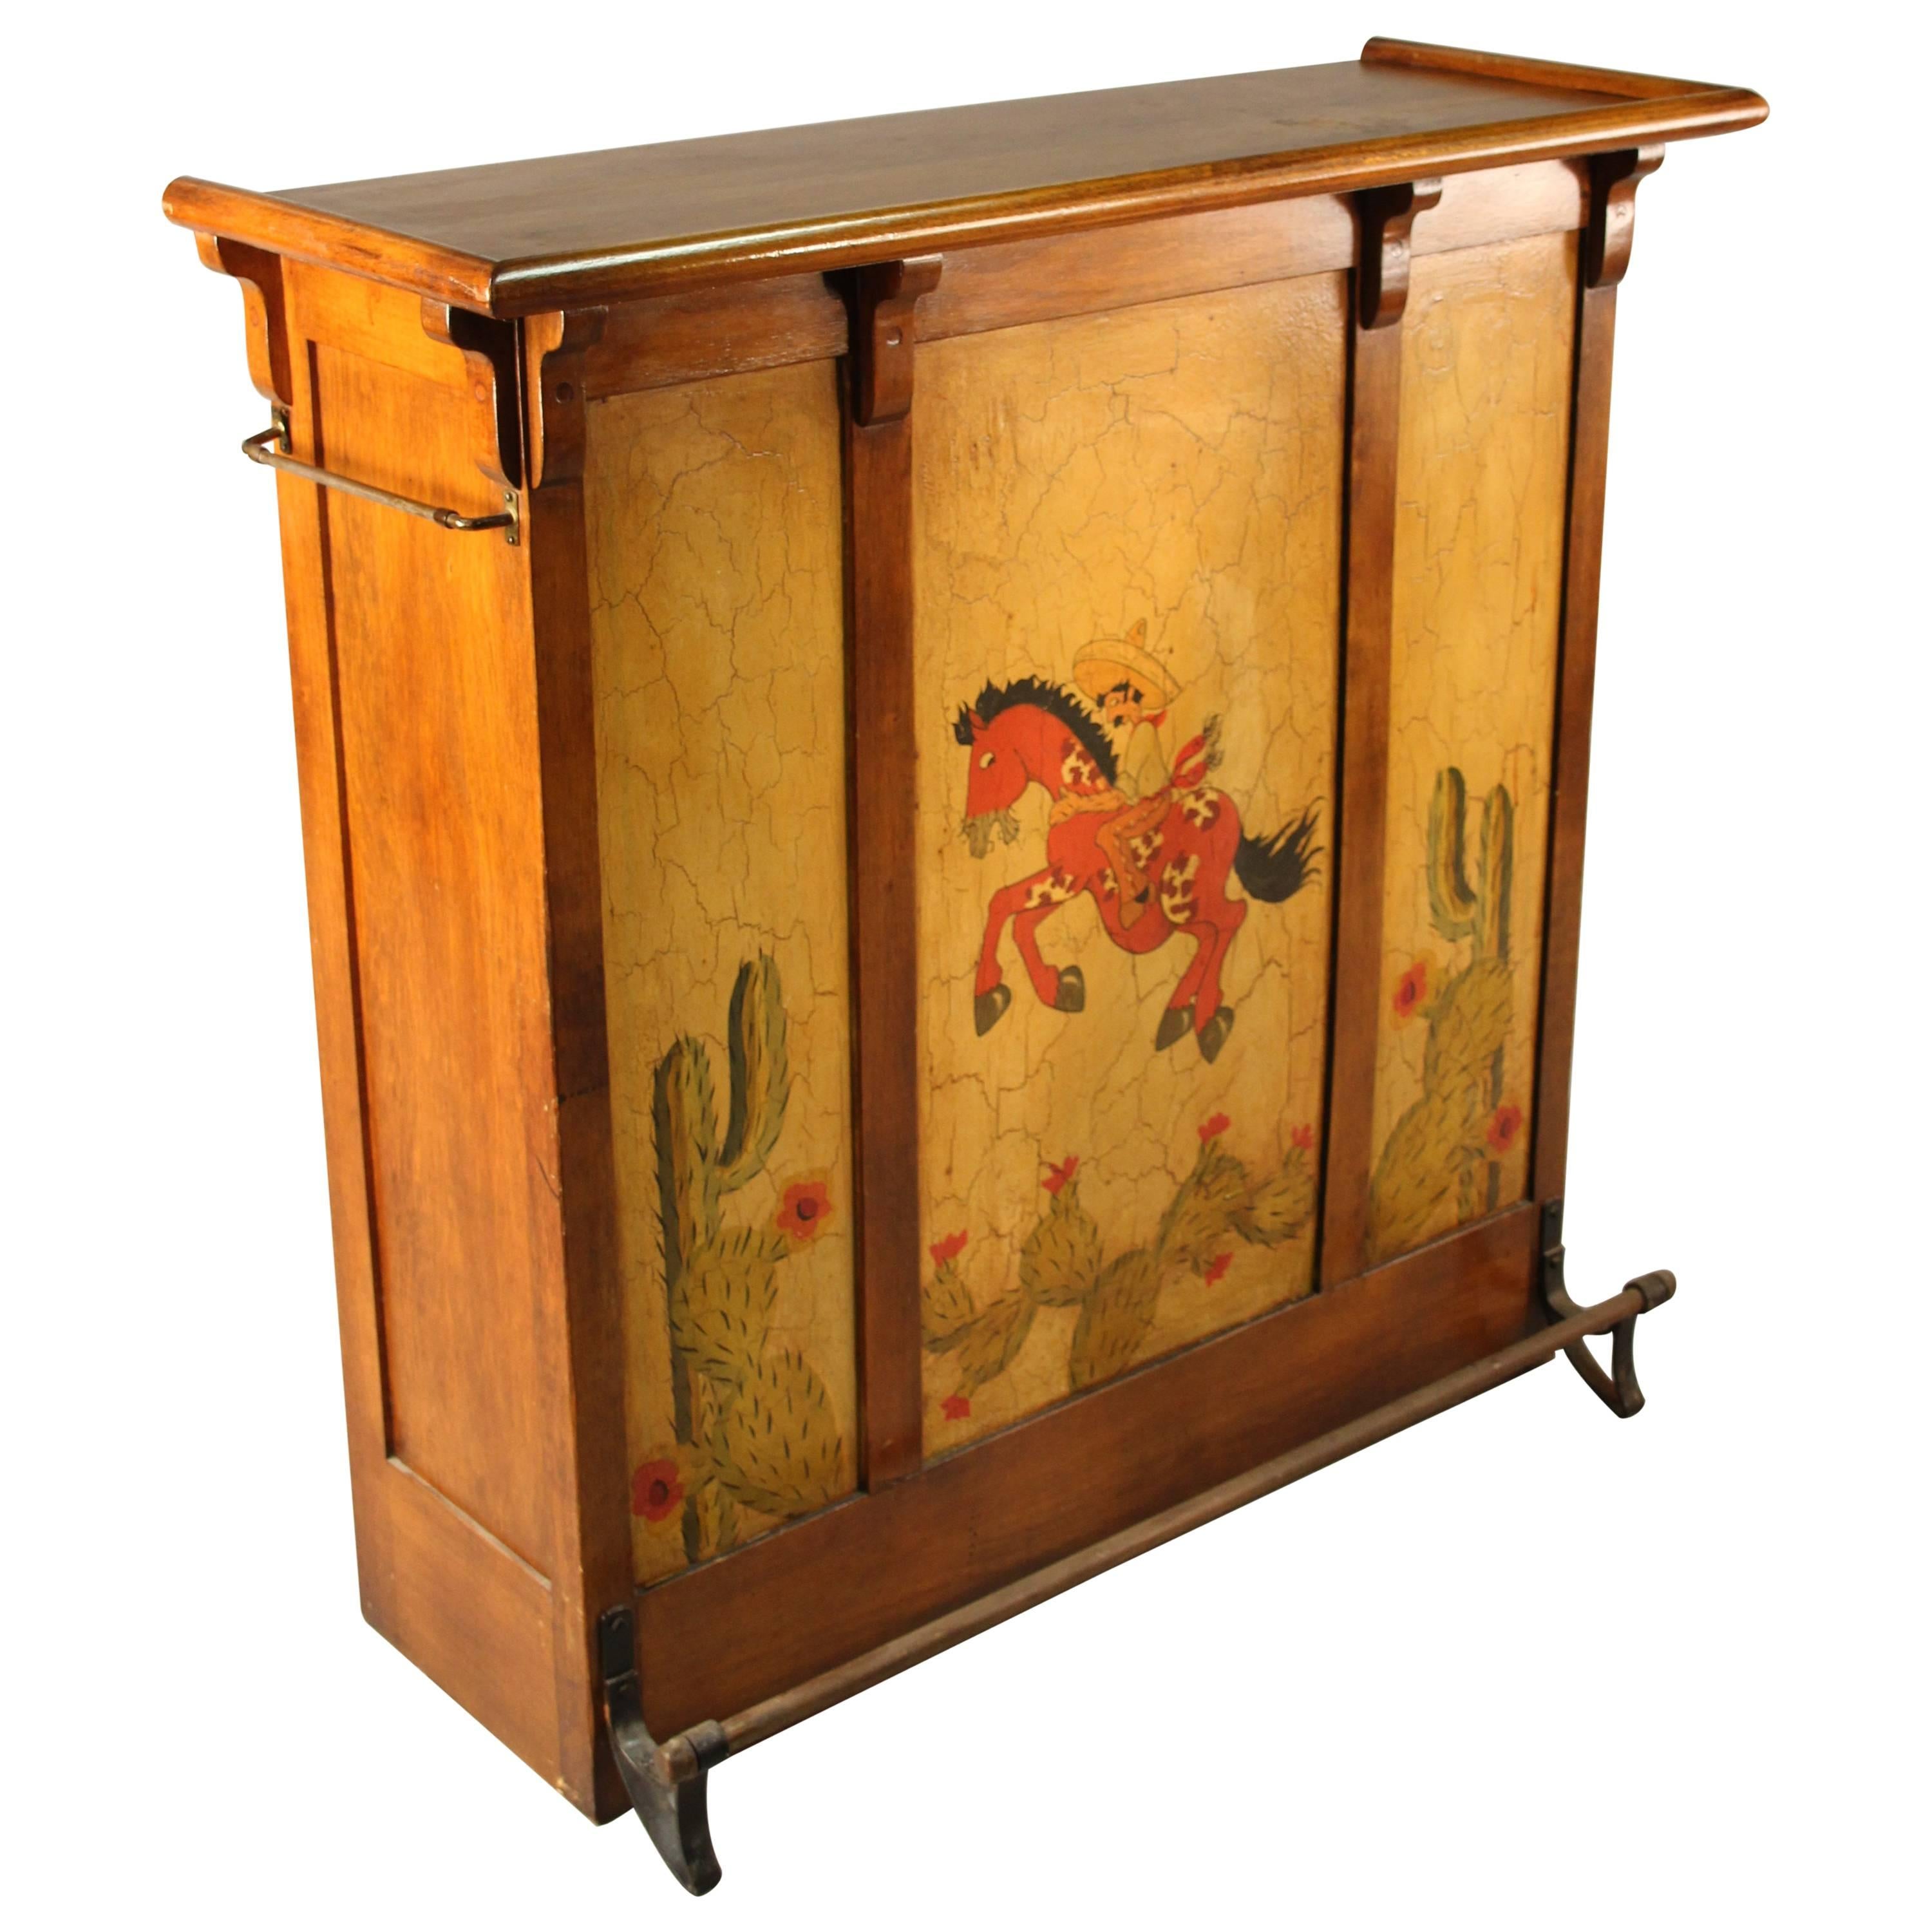 Monterey Period Bar with Intenoche Three-Panel Painting